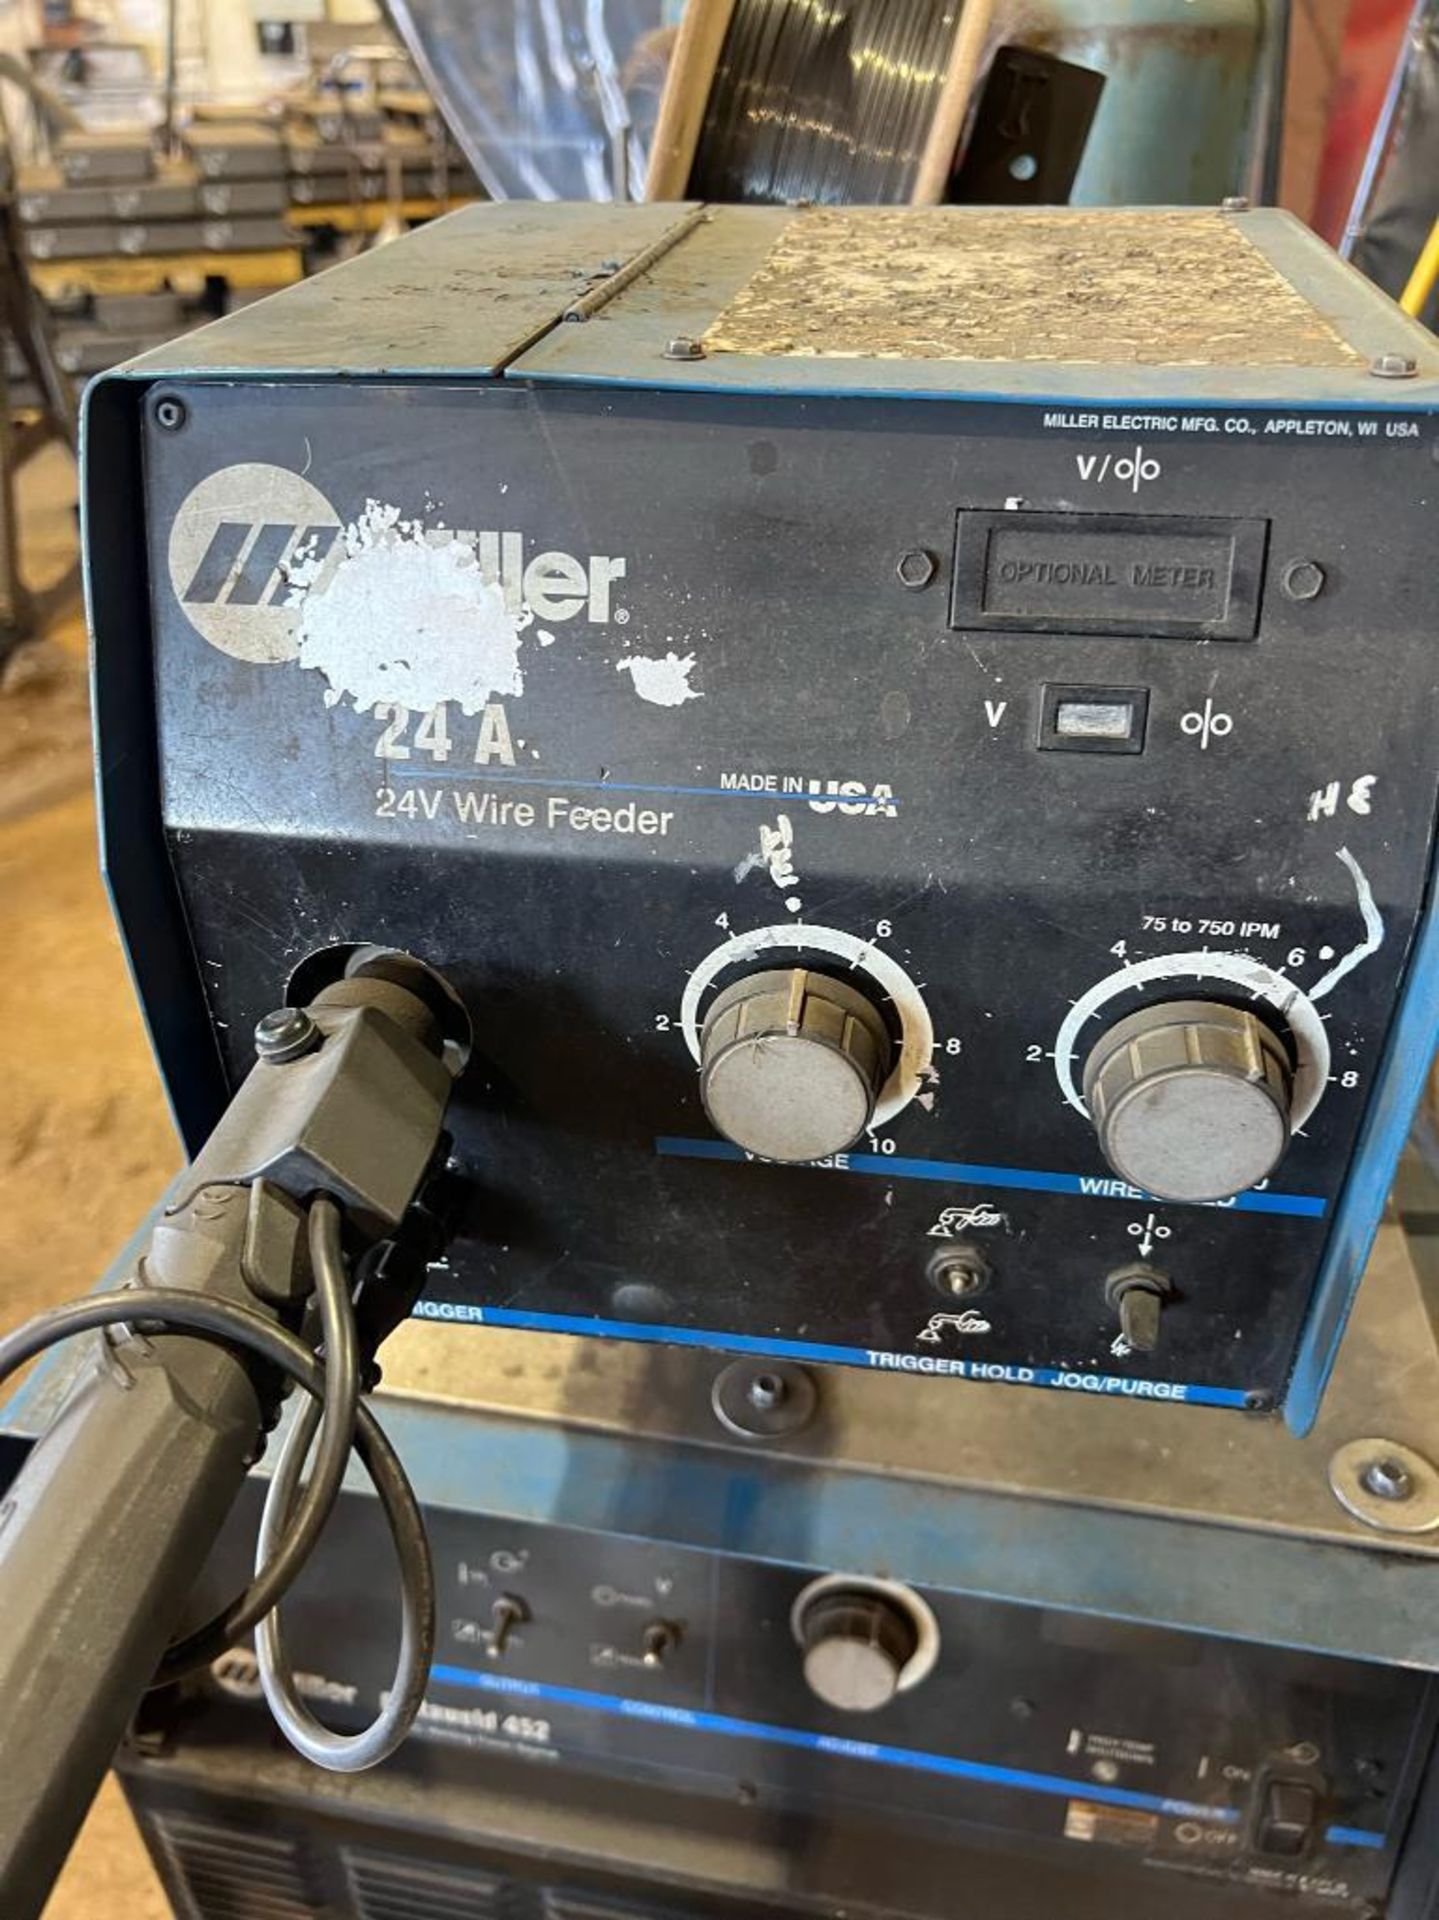 Miller Delta Weld 452 Wire Feed Welder, Sold with a Miller 24A 24V Wire Feeder, Single Phase, Bottle - Image 3 of 4